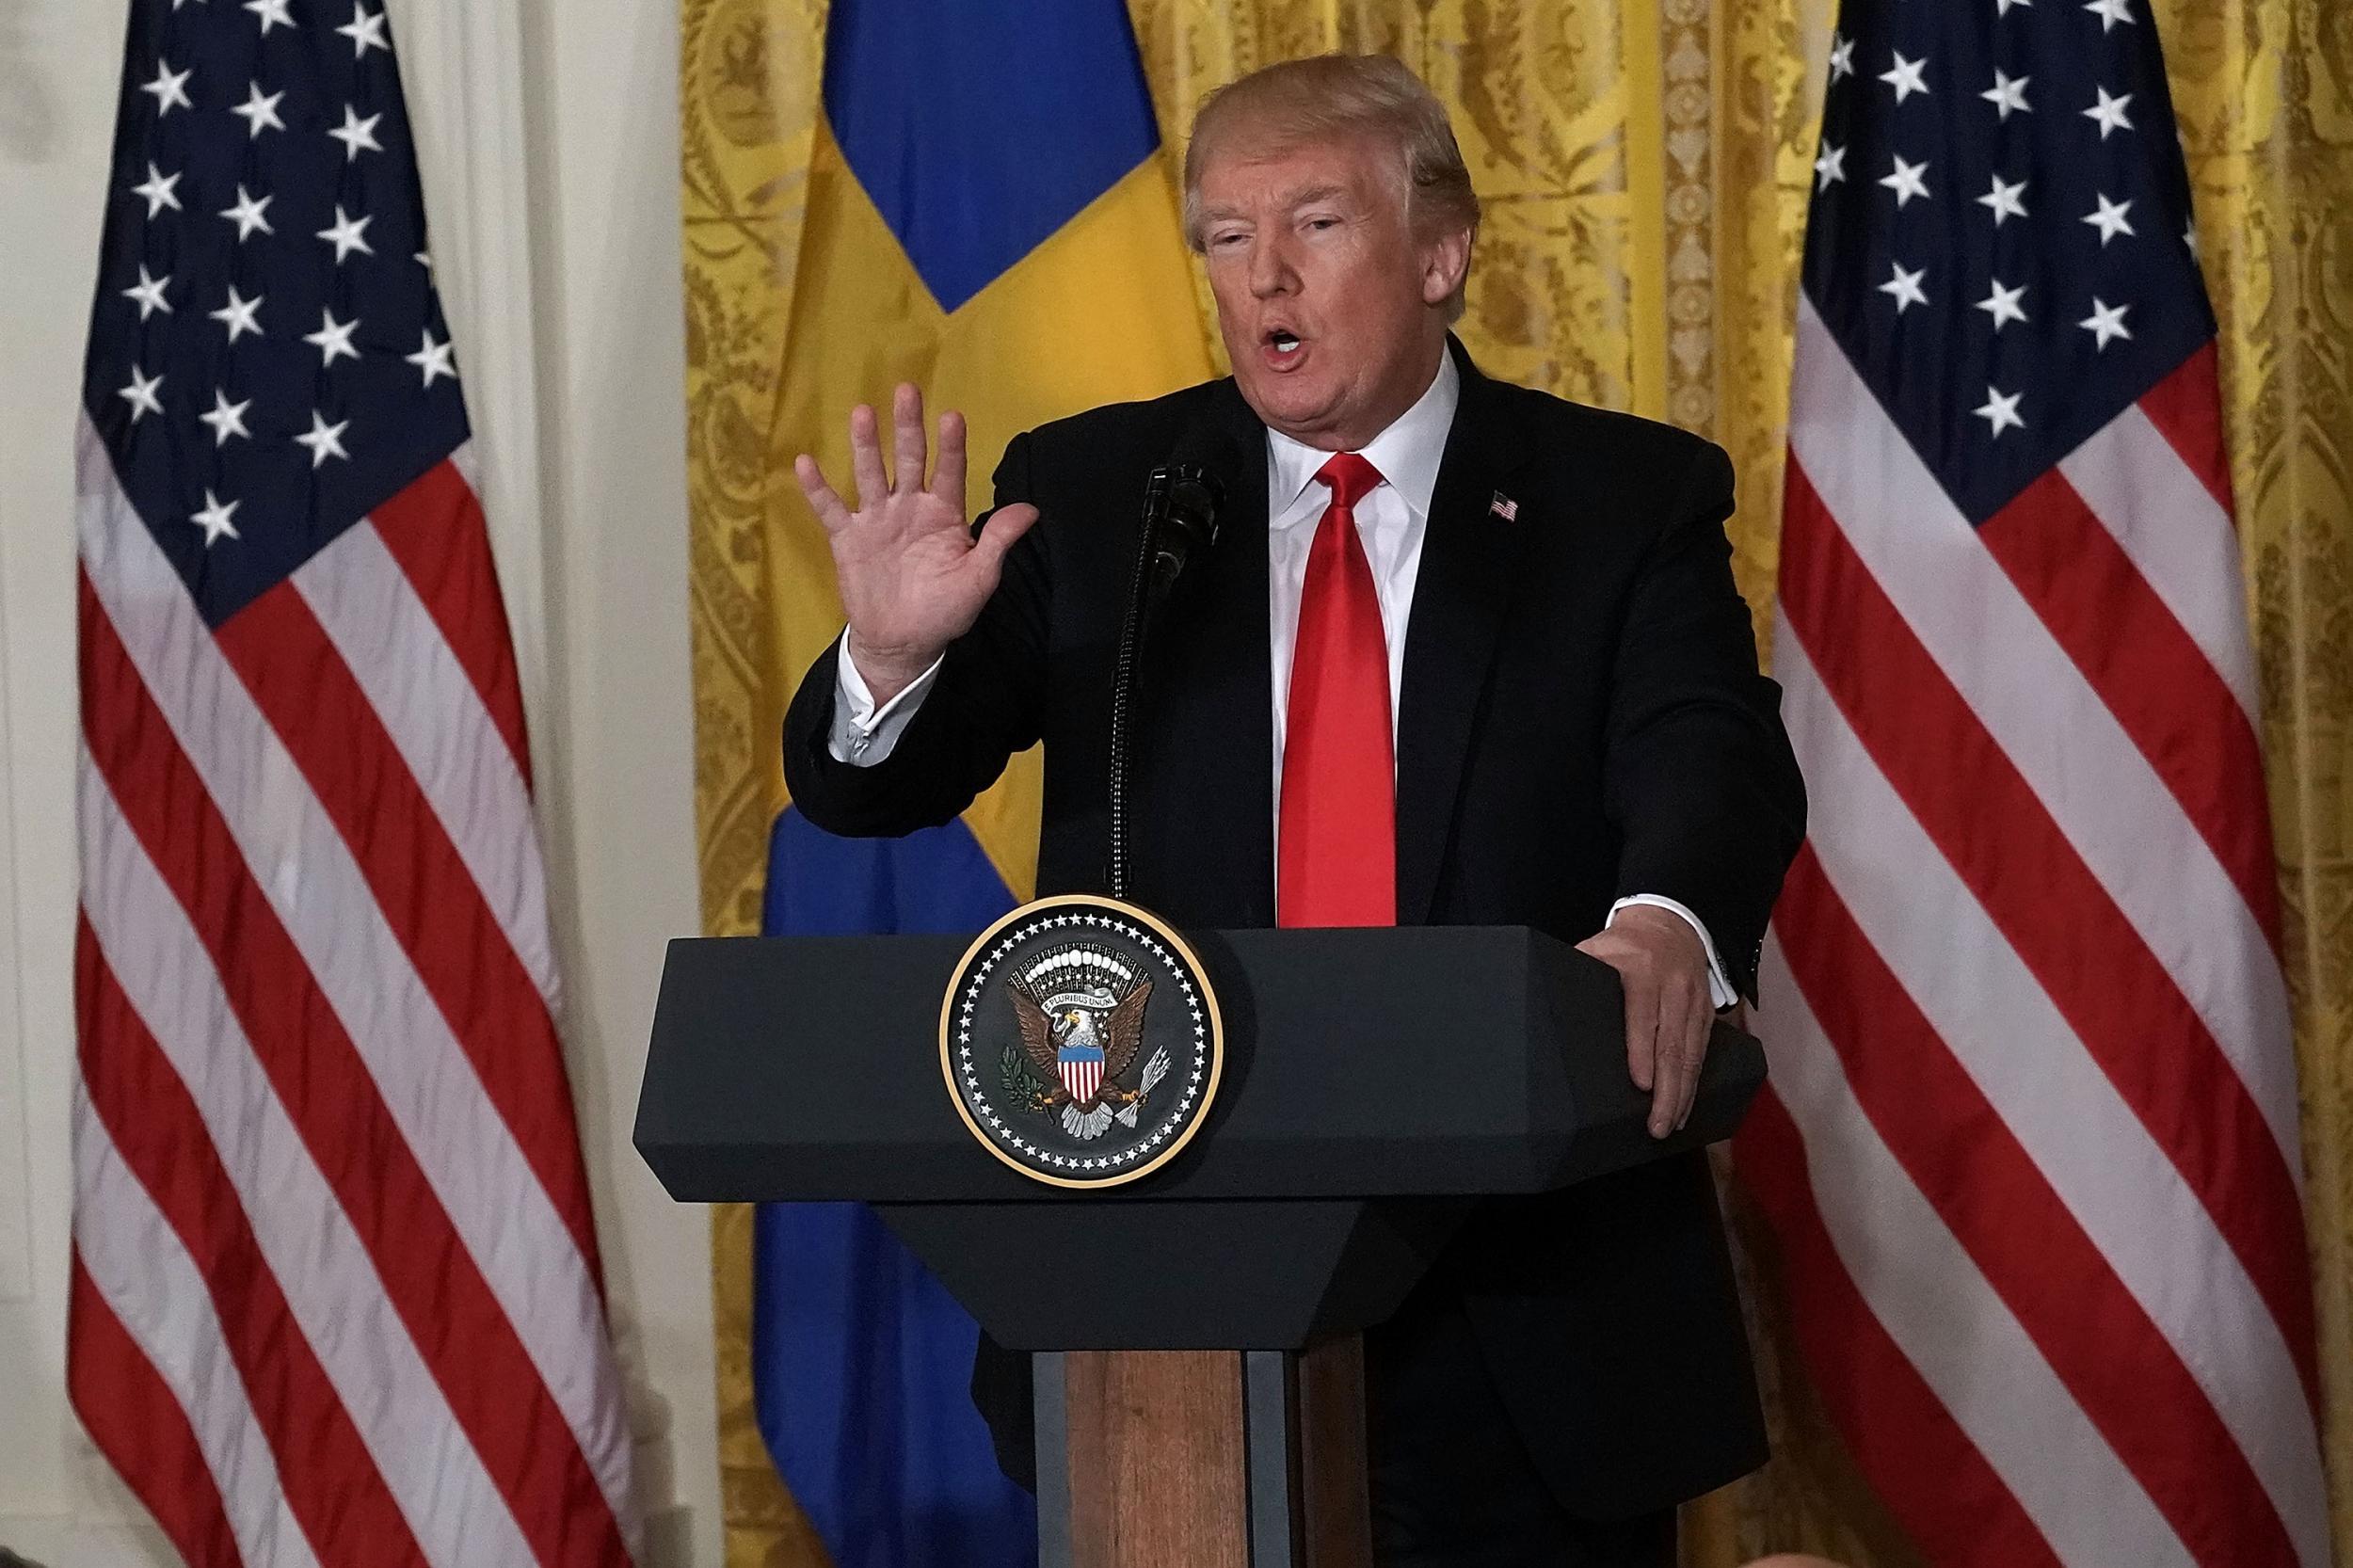 President Donald Trump speaks during a joint news conference with Swedish Prime Minister Stefan Lofven